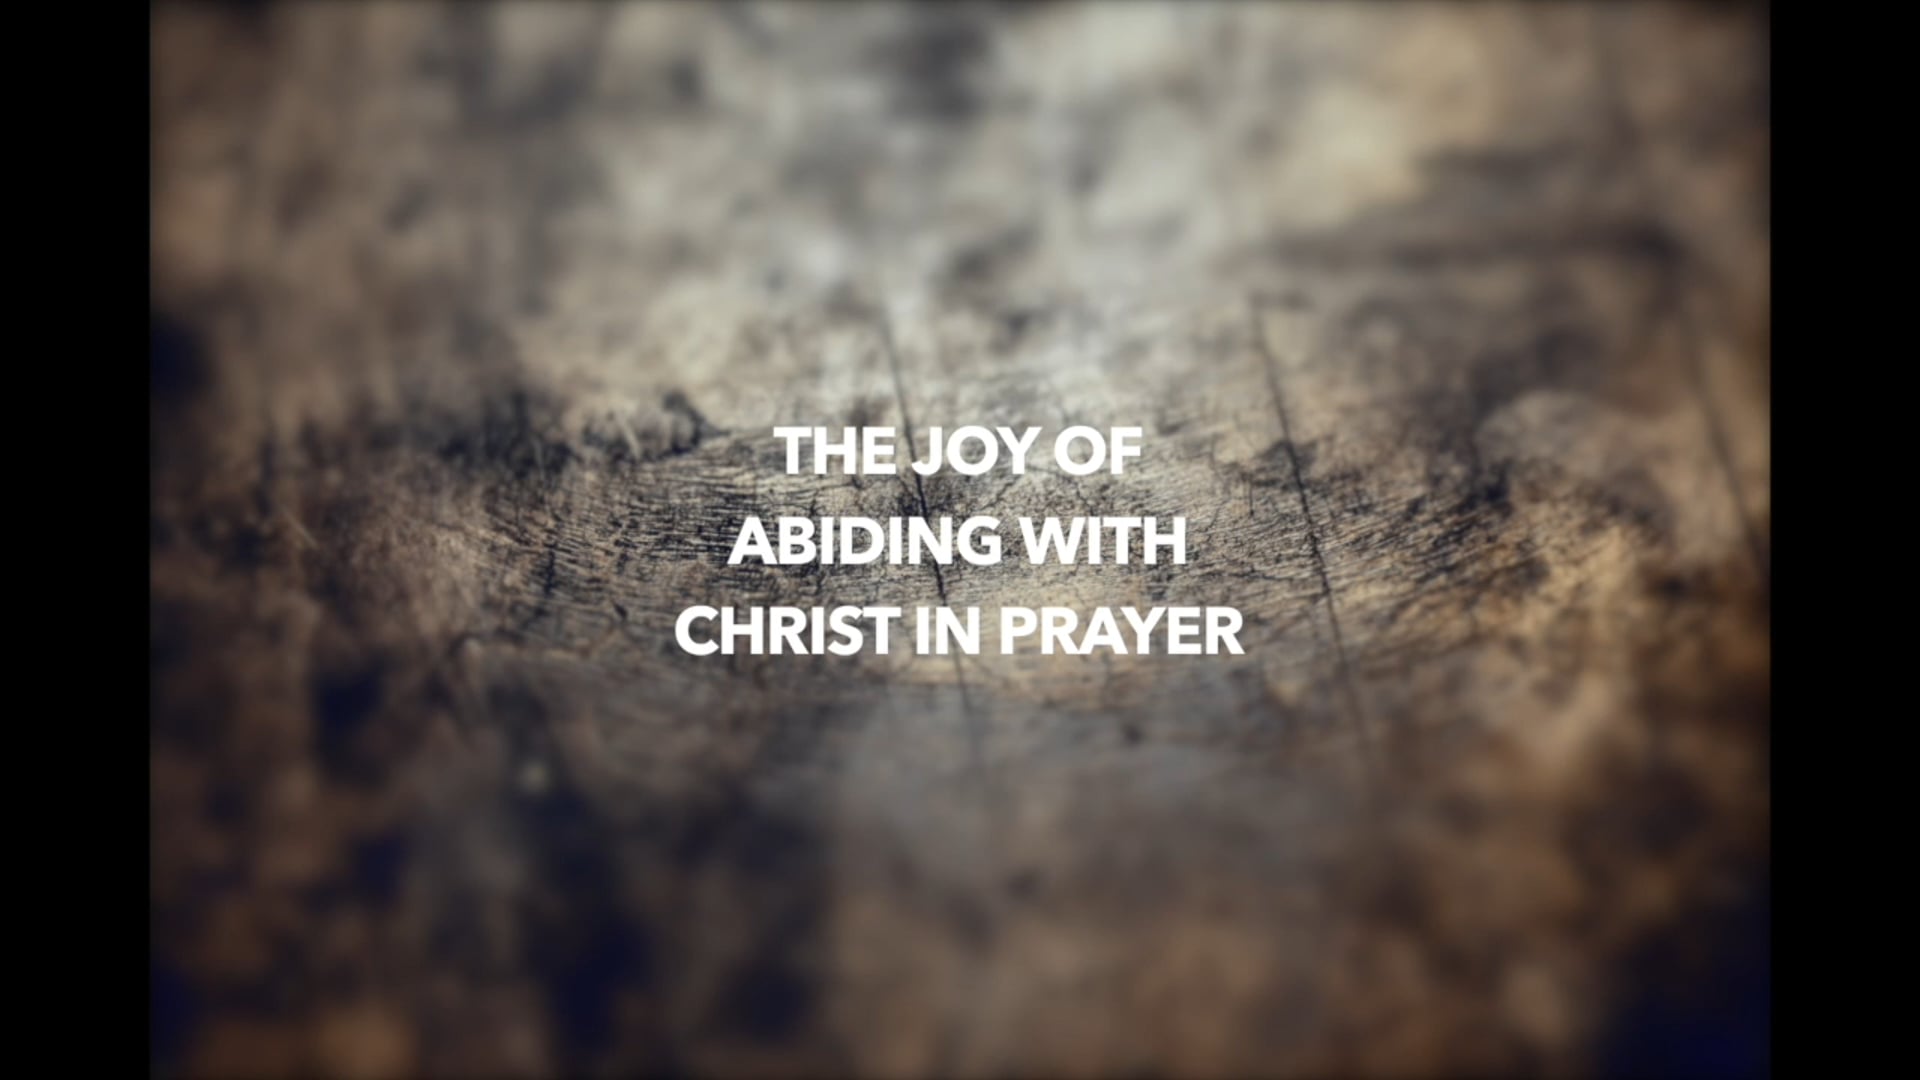 The Joy of Abiding With Christ in Prayer - Part 4 of 4